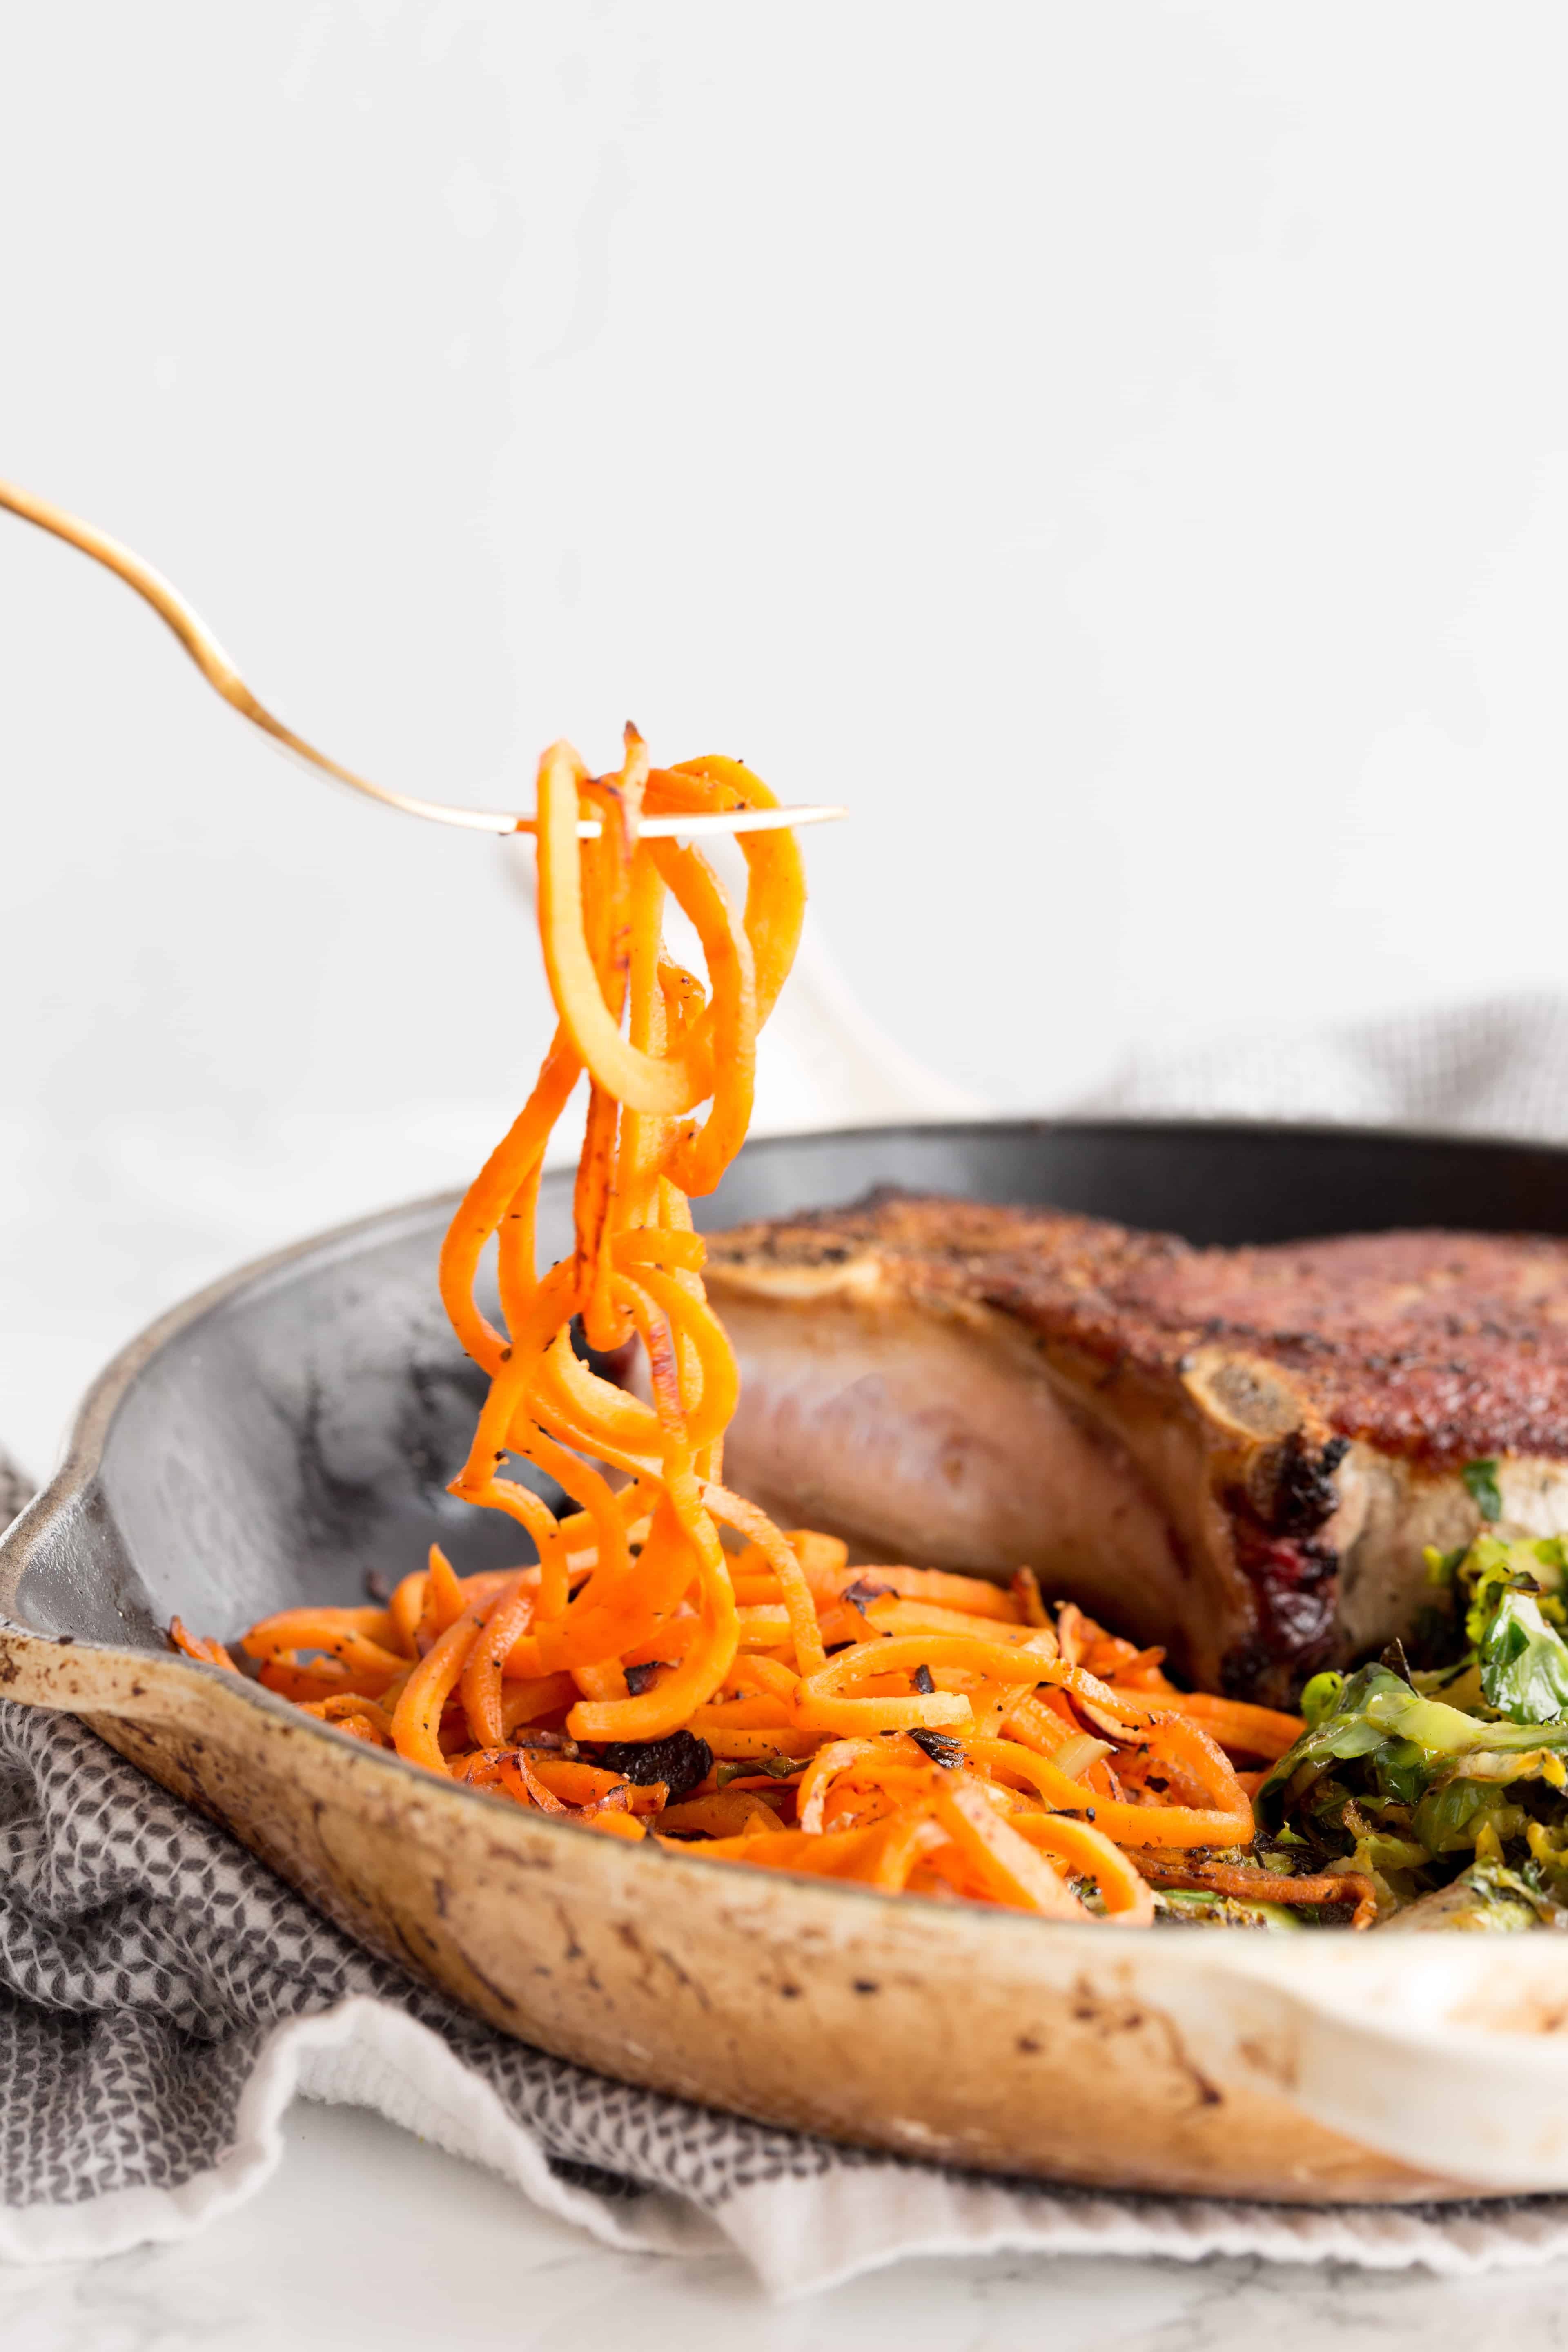 Easy Pork Chops with Spiralized Sweet Potatoes and Brussels Sprouts